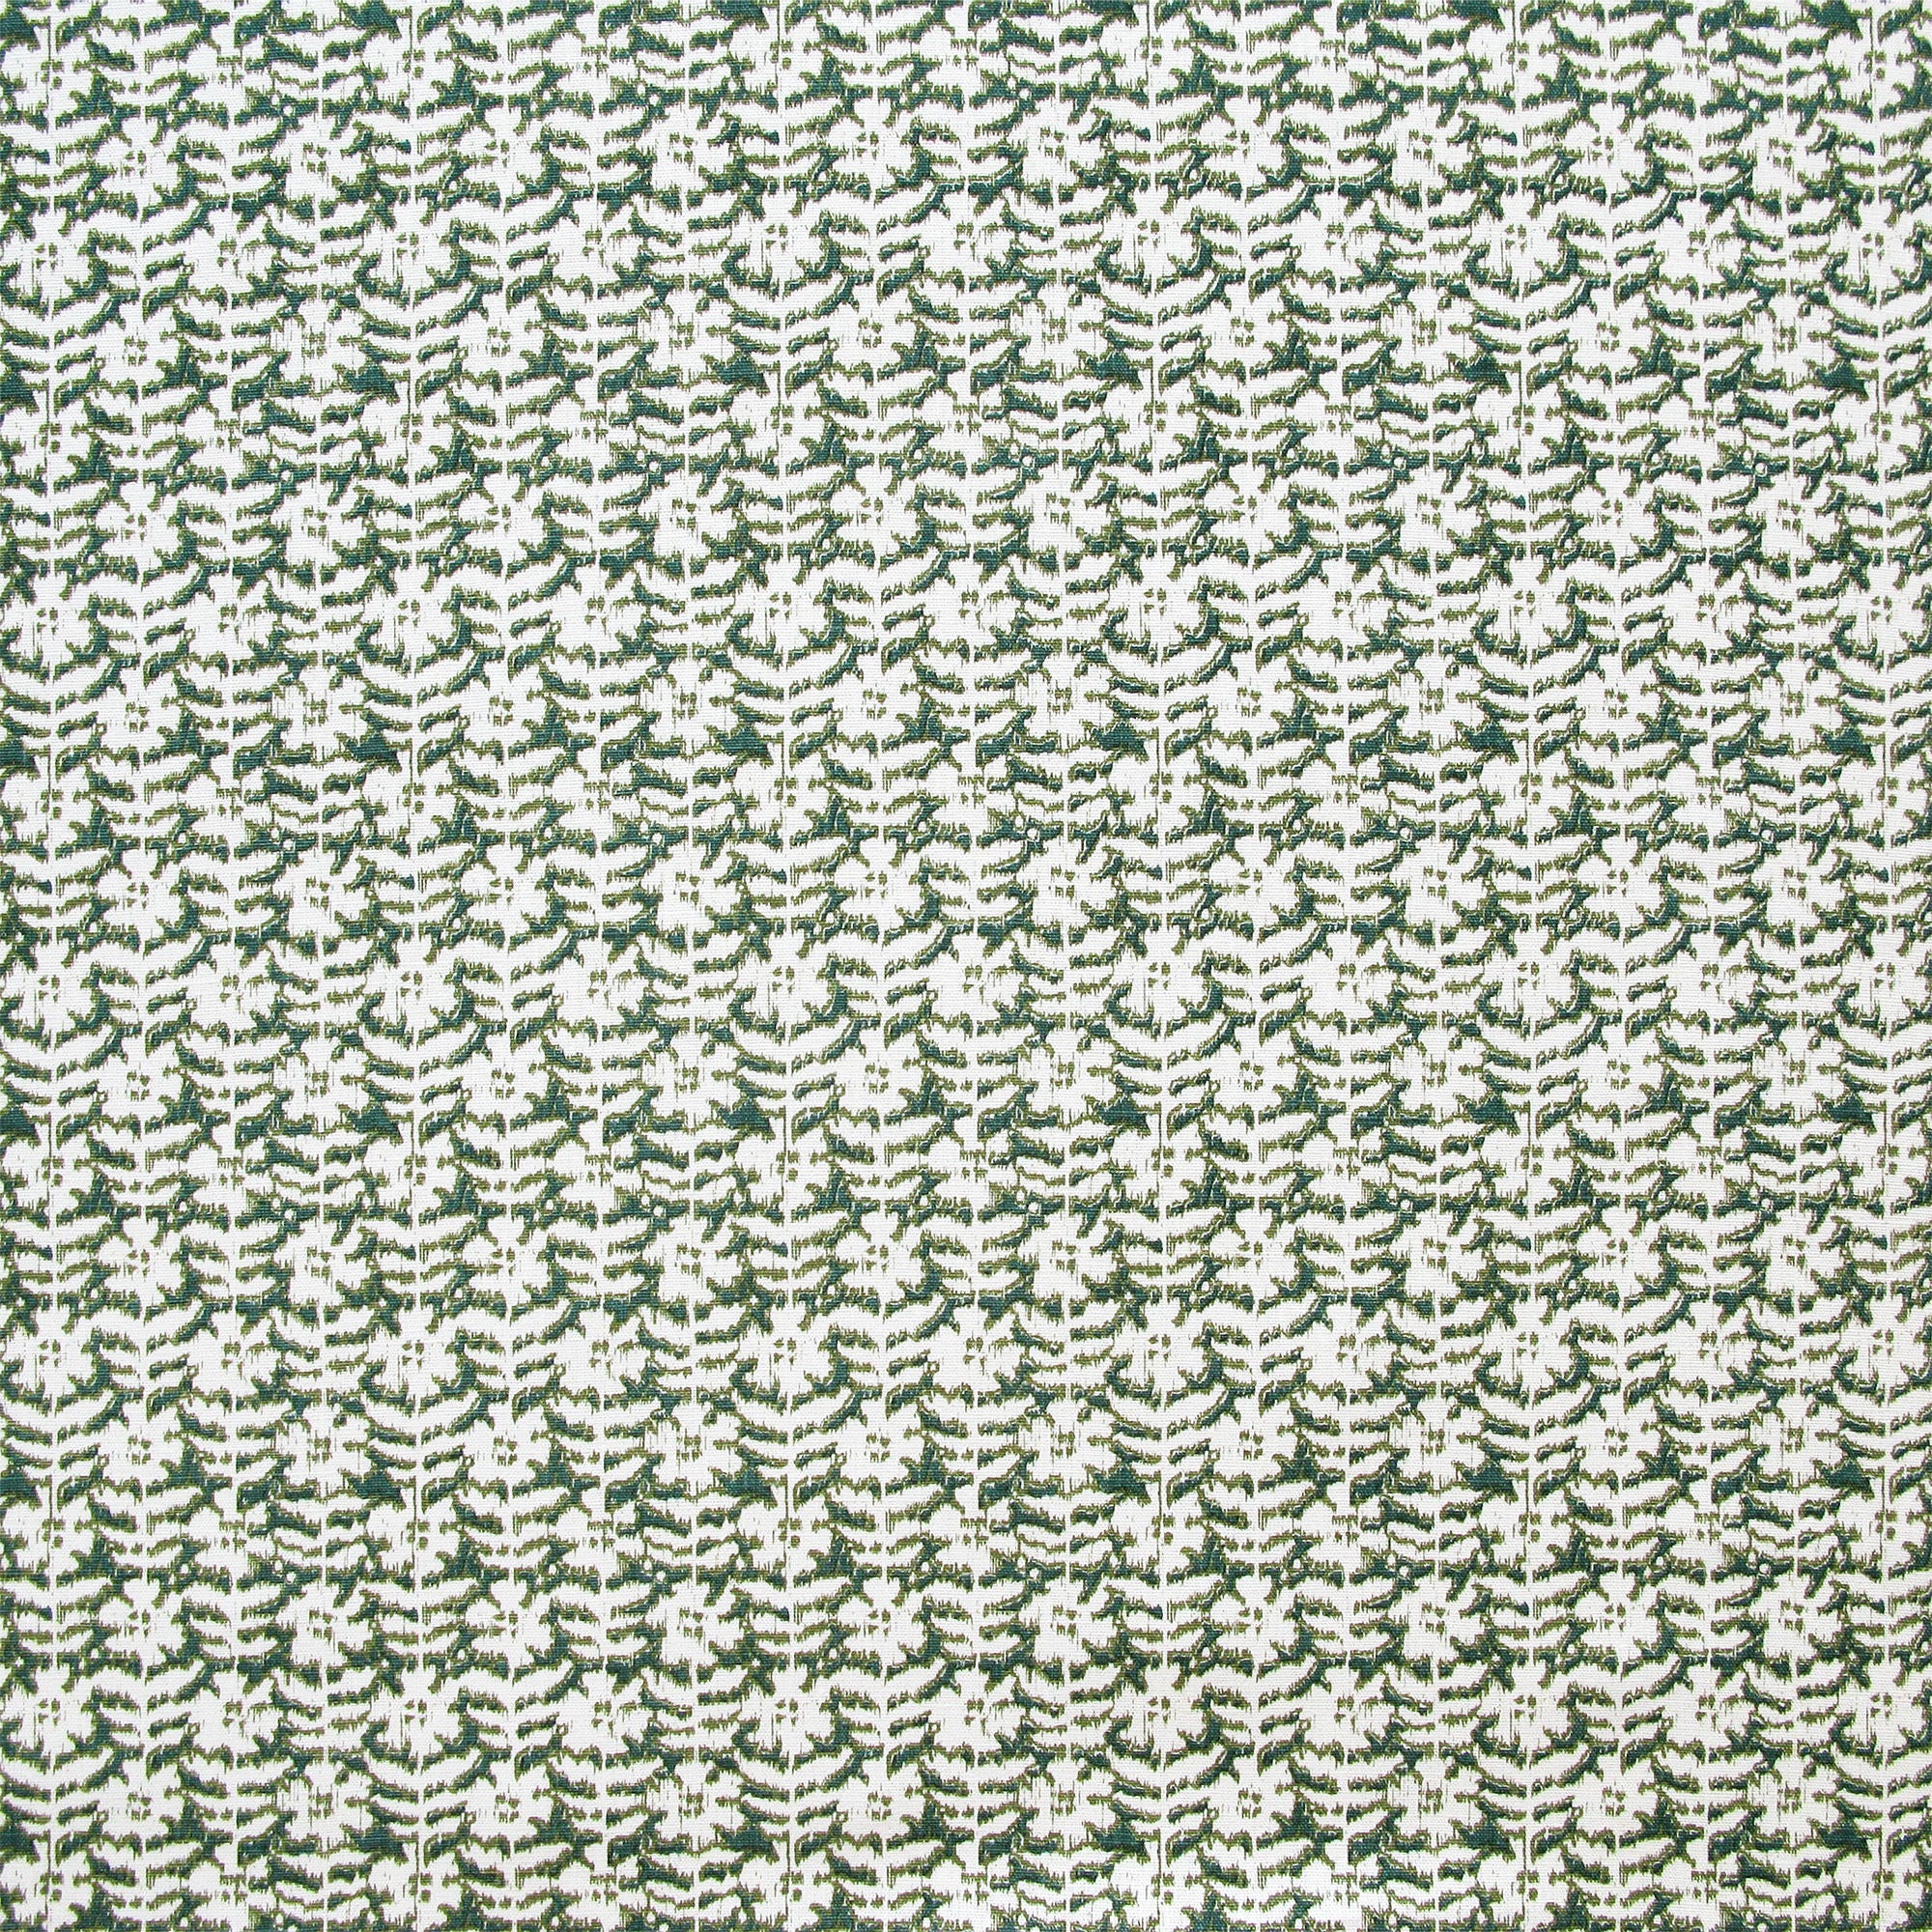 Detail of fabric in a floral grid print in white on a forest green field.